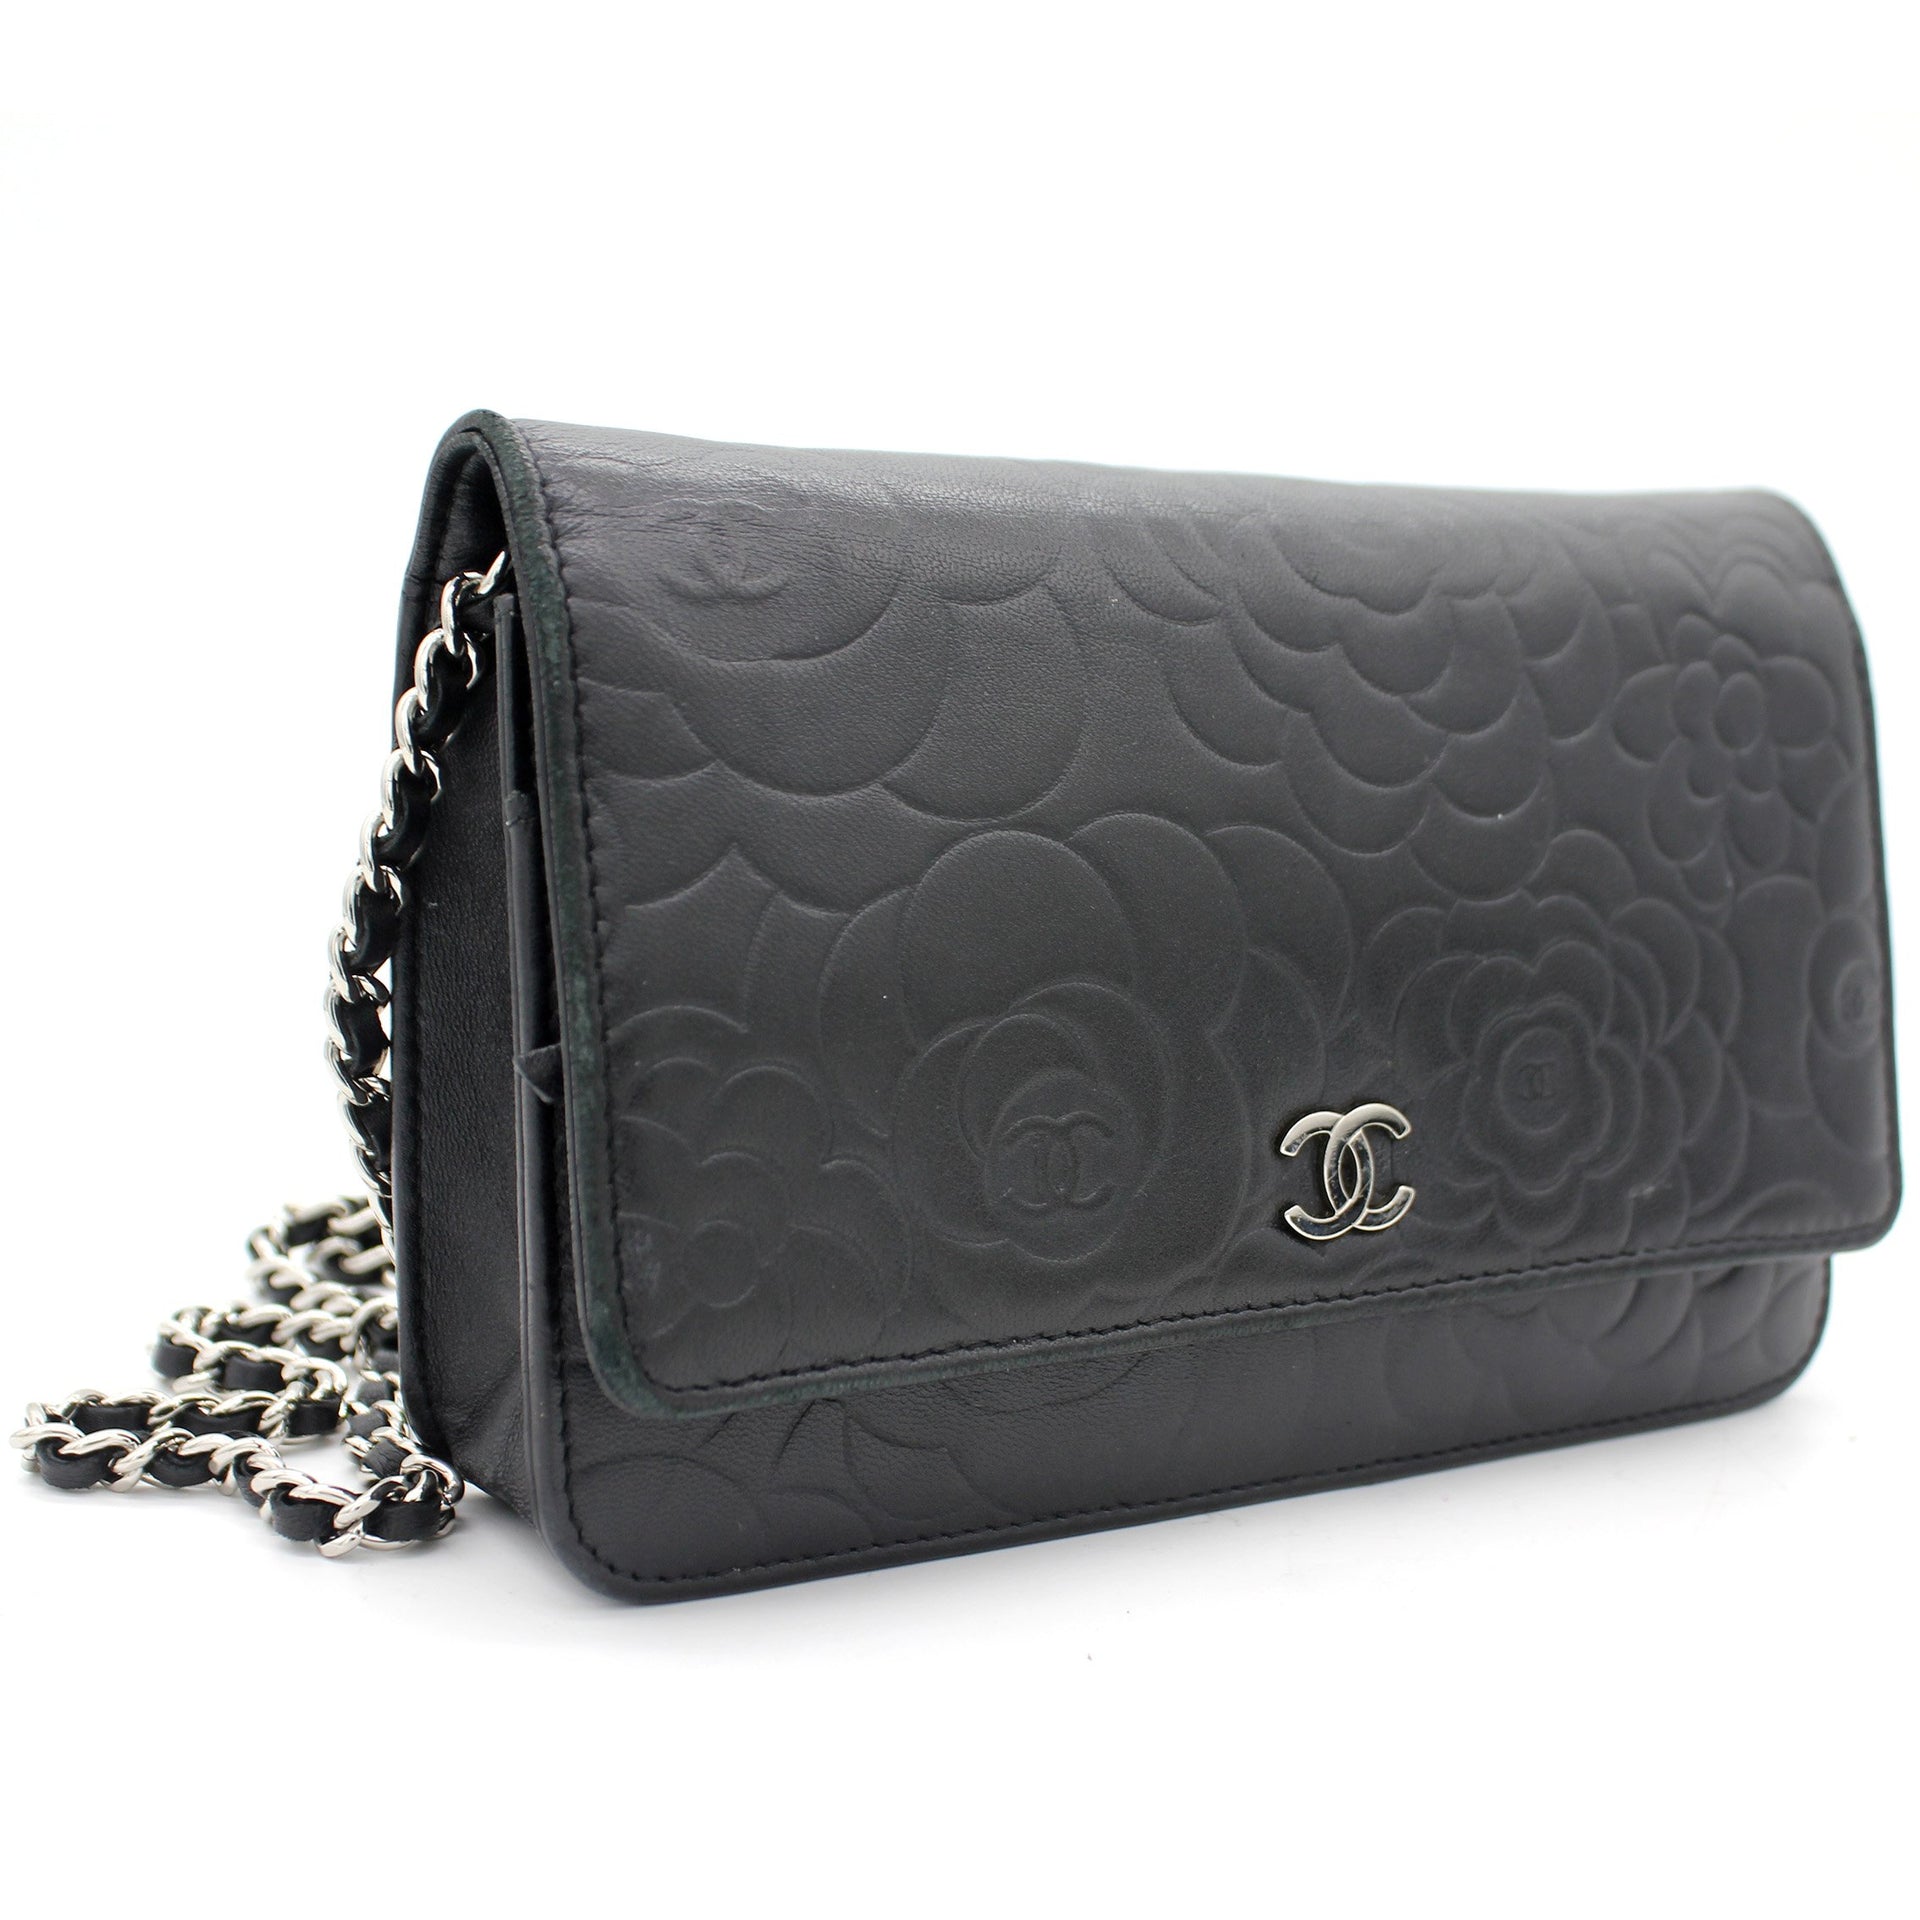 Chanel Black Lambskin Leather Camellia Embossed WOC (wallet-on-chain) Clutch  Bag